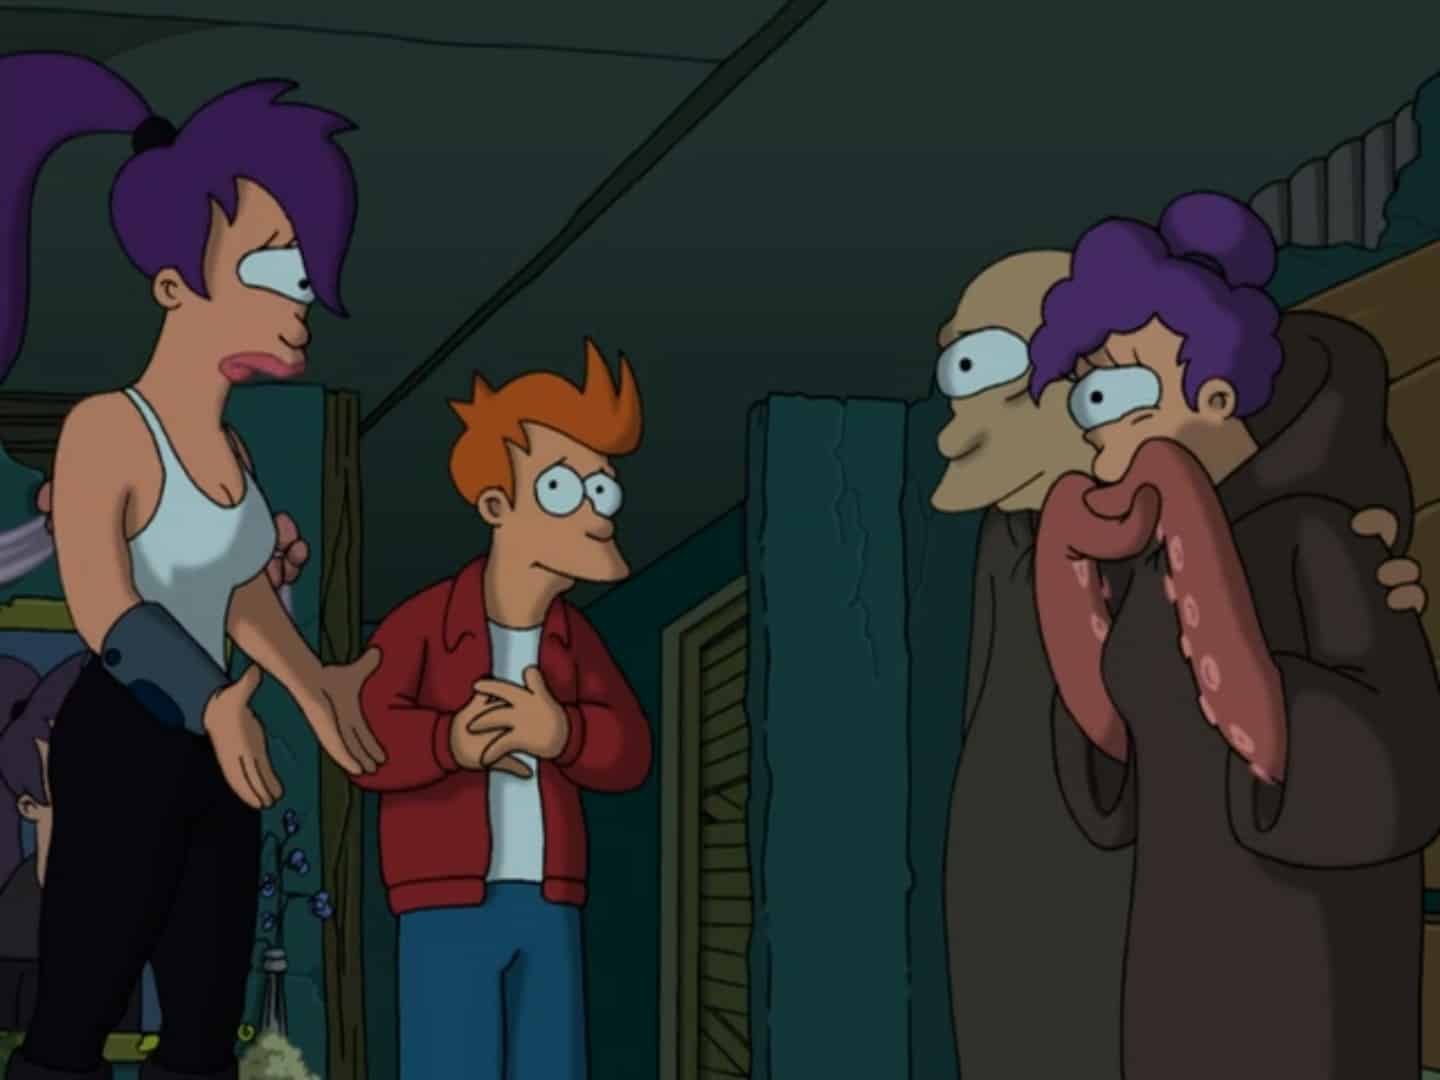 Leela and her parents with Fry in the middle in this image from 20th Century Fox Television